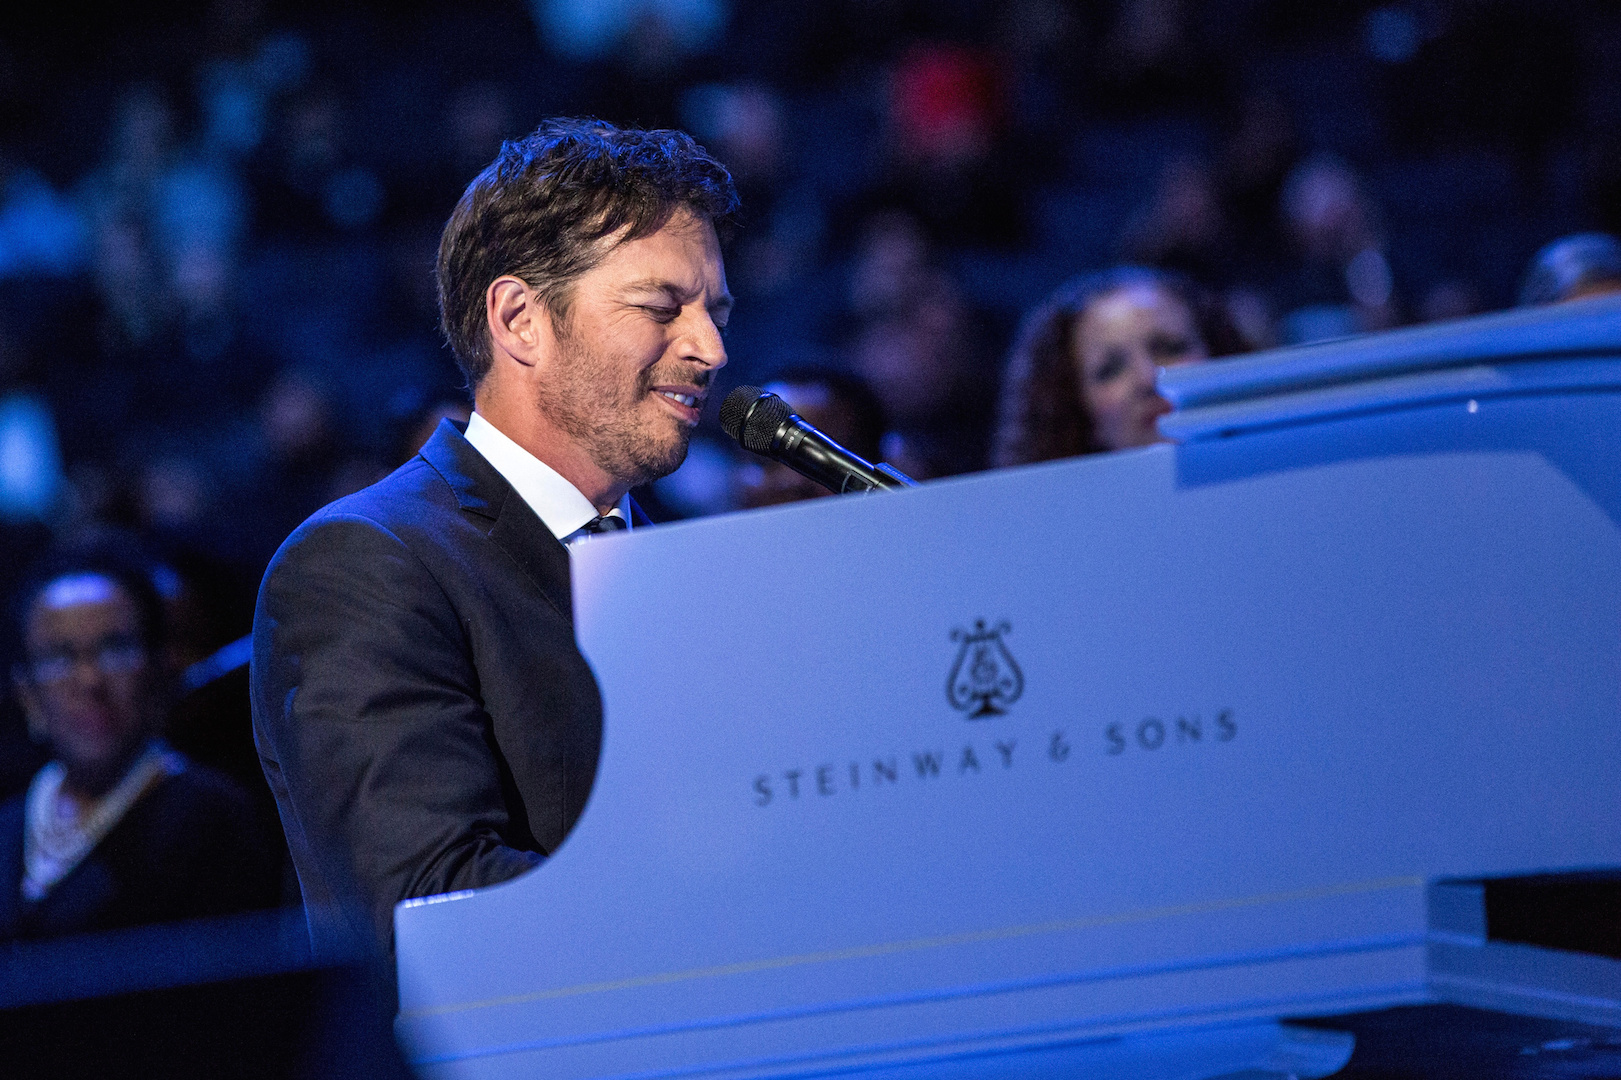 Harry Connick Jr. performs prior to a Mass celebrated by Pope Francis at Madison Square Garden in New York City. (CNS photo/Andrew Burton, pool via EPA) 